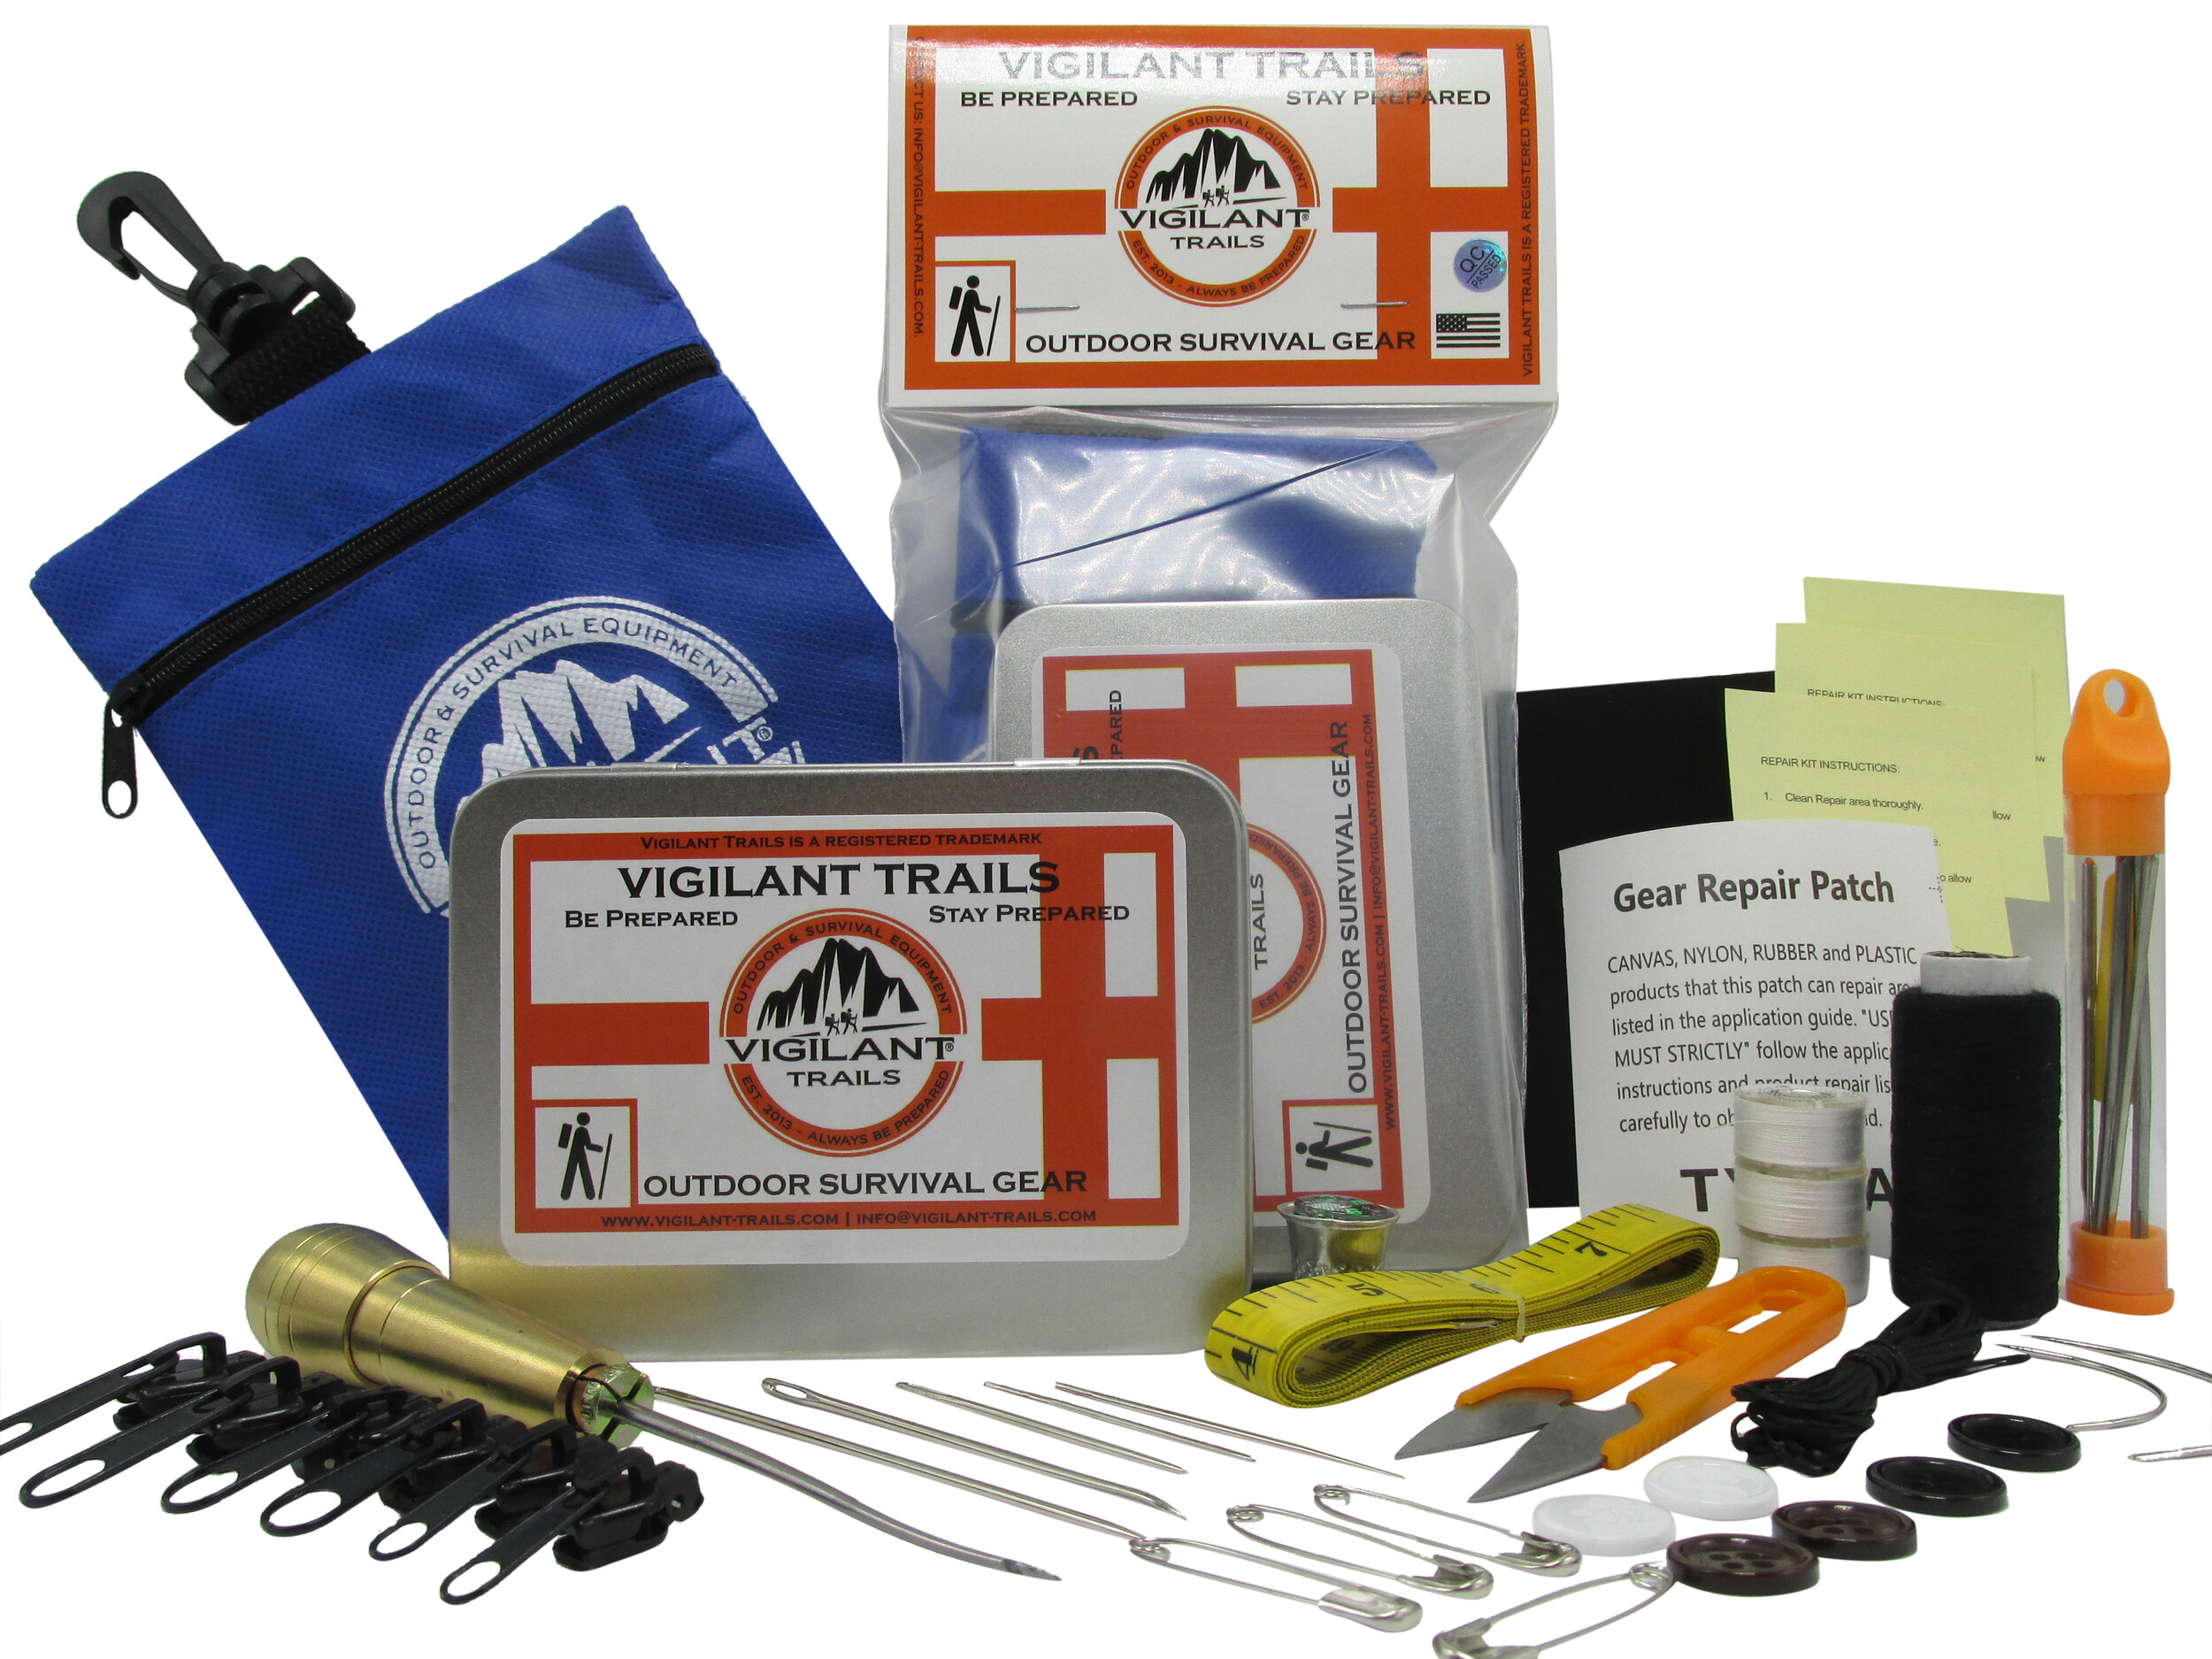 Upholstery Repair Sewing Kit Heavy Duty Sewing Kit With Sewing Awl Seam  Ripper Hand Sewing Stitching Needles Sewing